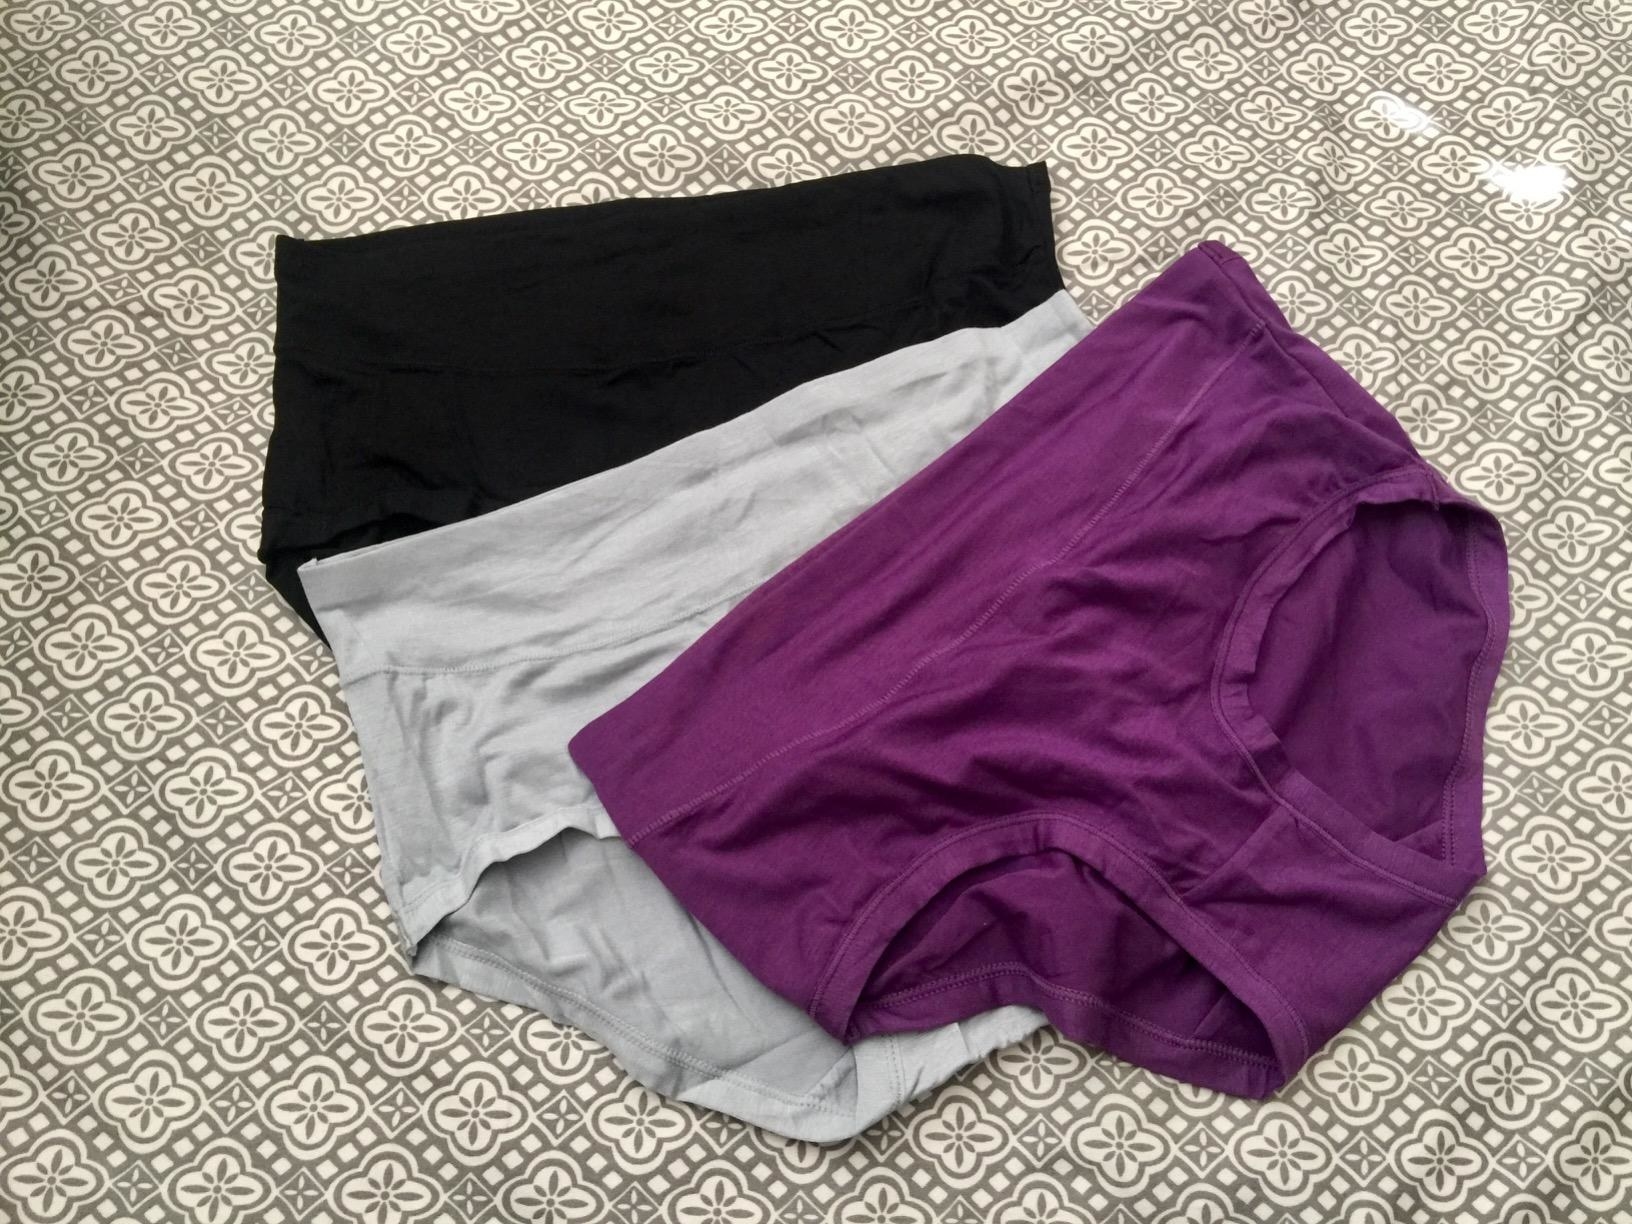 a pack of the undies in black, gray and purple